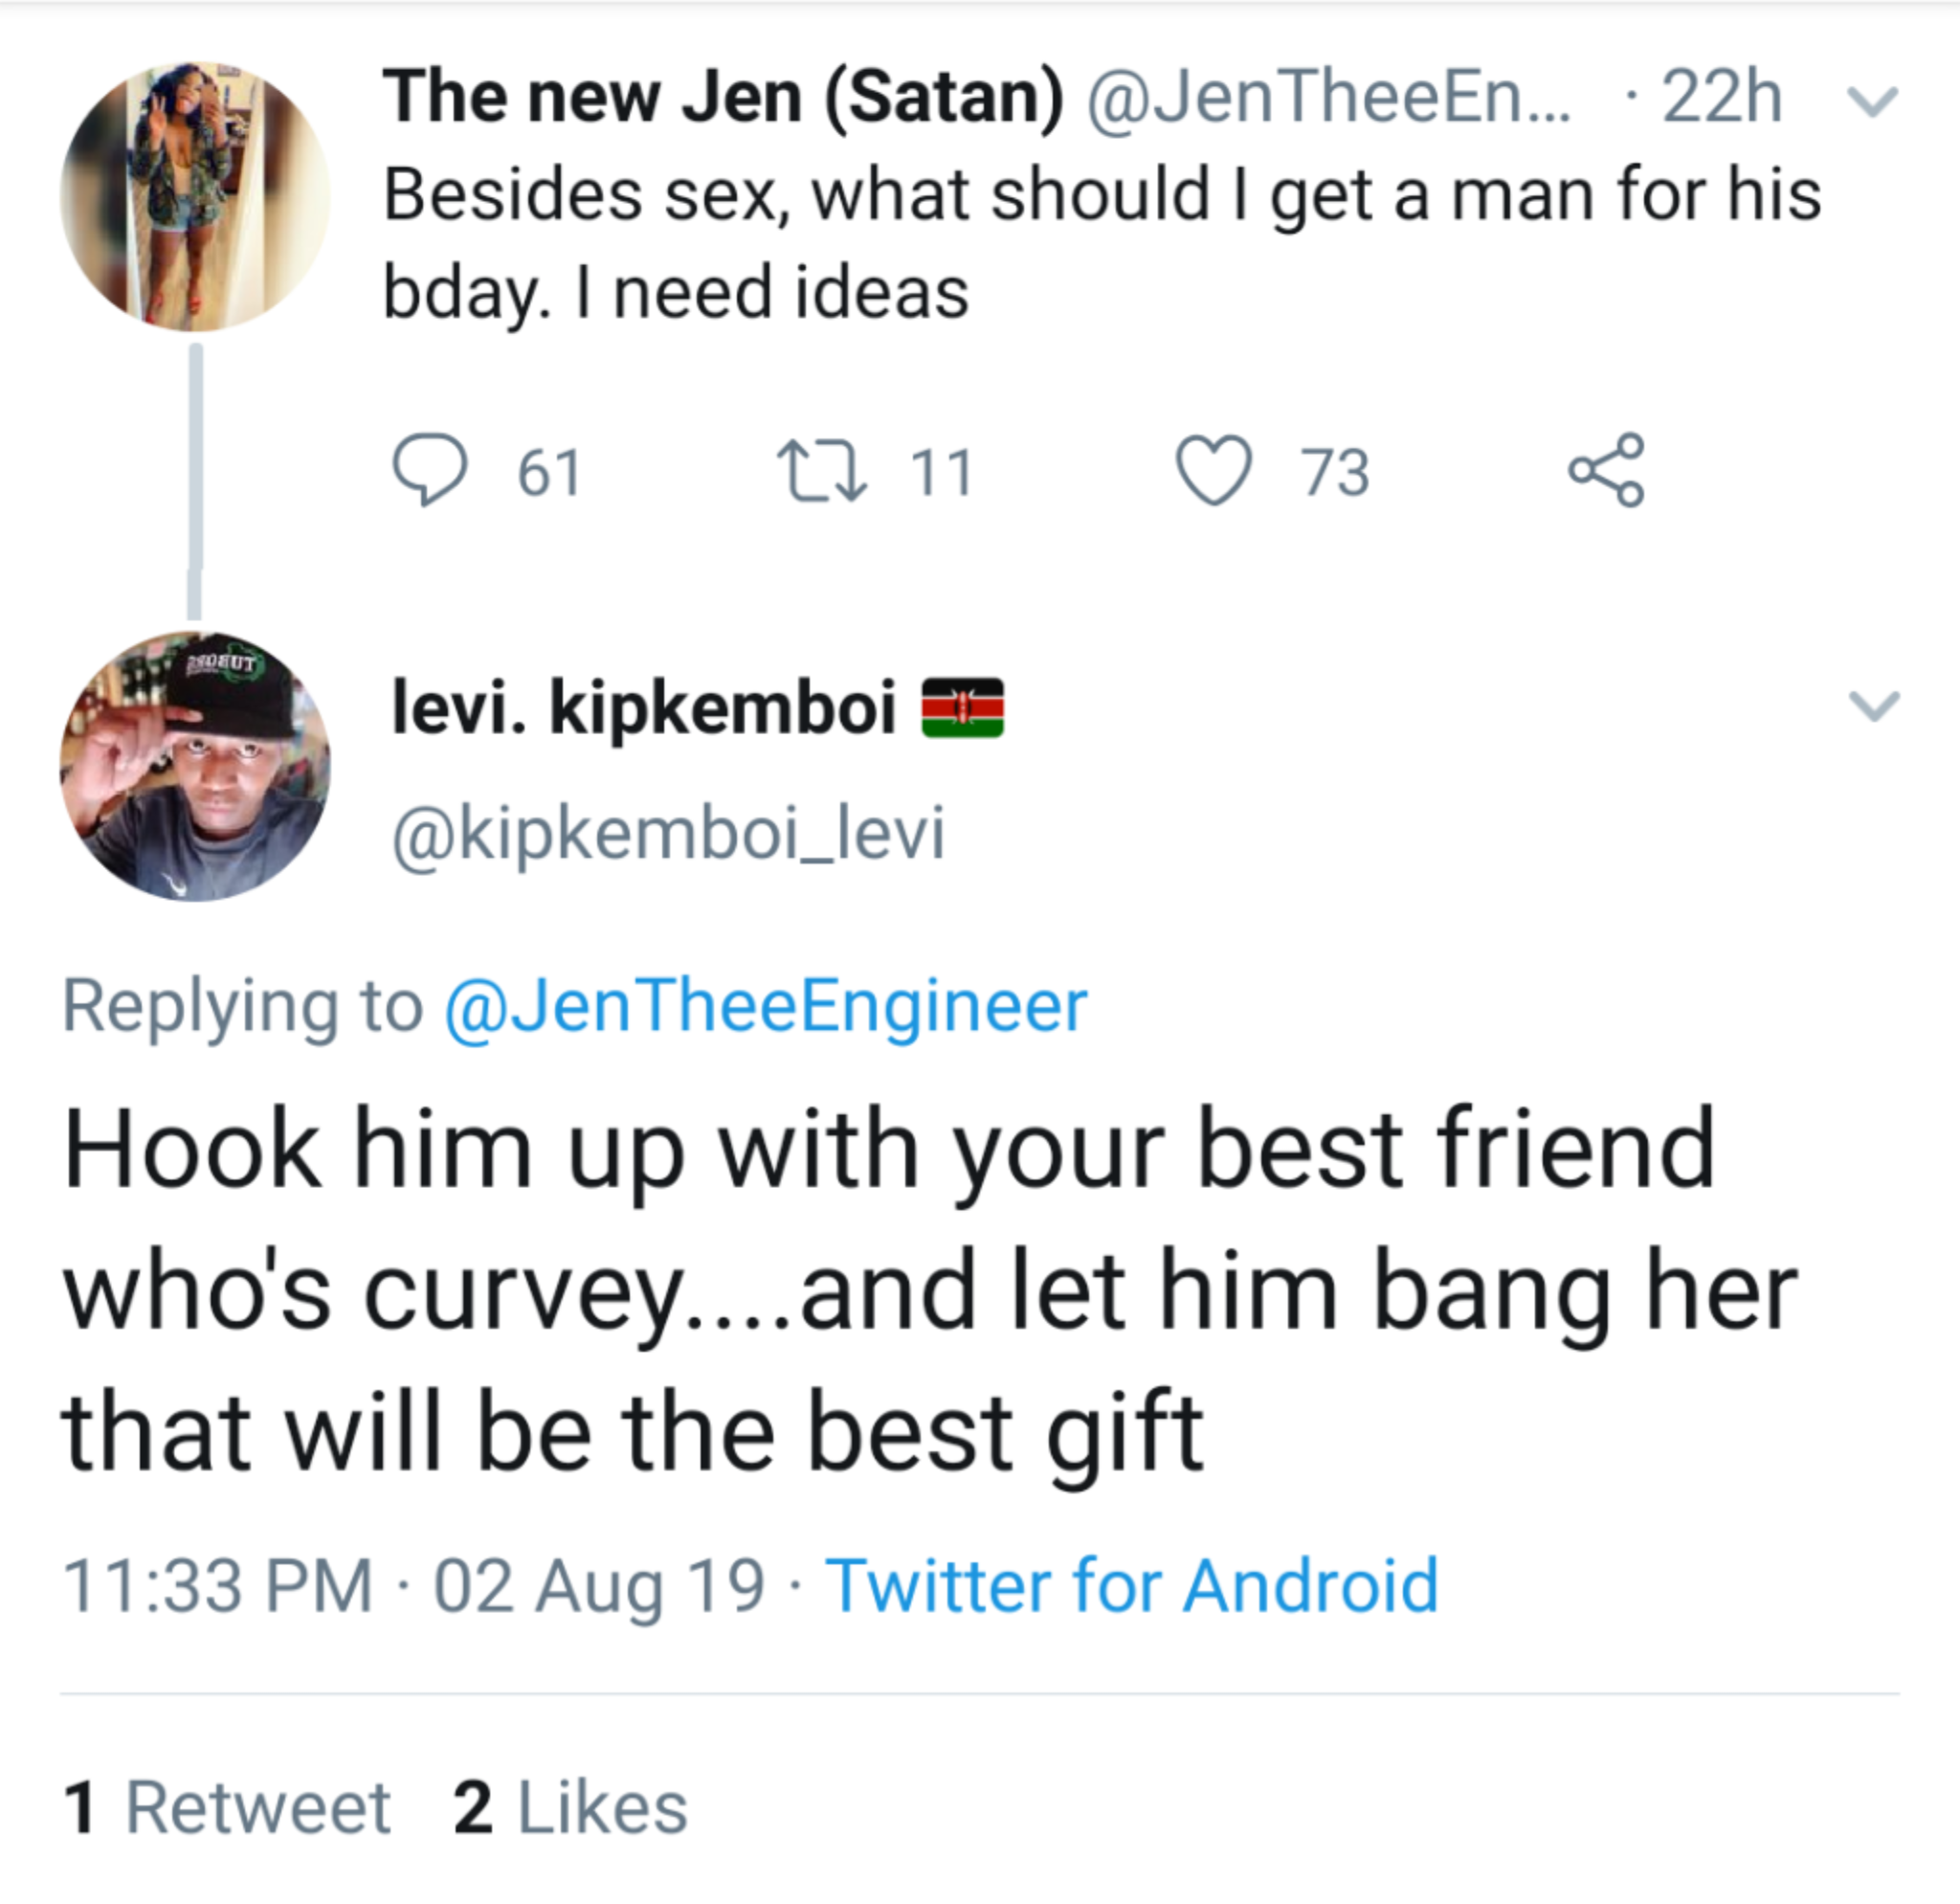 Besides sex, what should I get a man for his bday. I need ideas 9 61 22.11 73 levi. kipkemboi Thee Engineer Hook him up with your best friend who's curvey....and let him bang her that will be the best gift